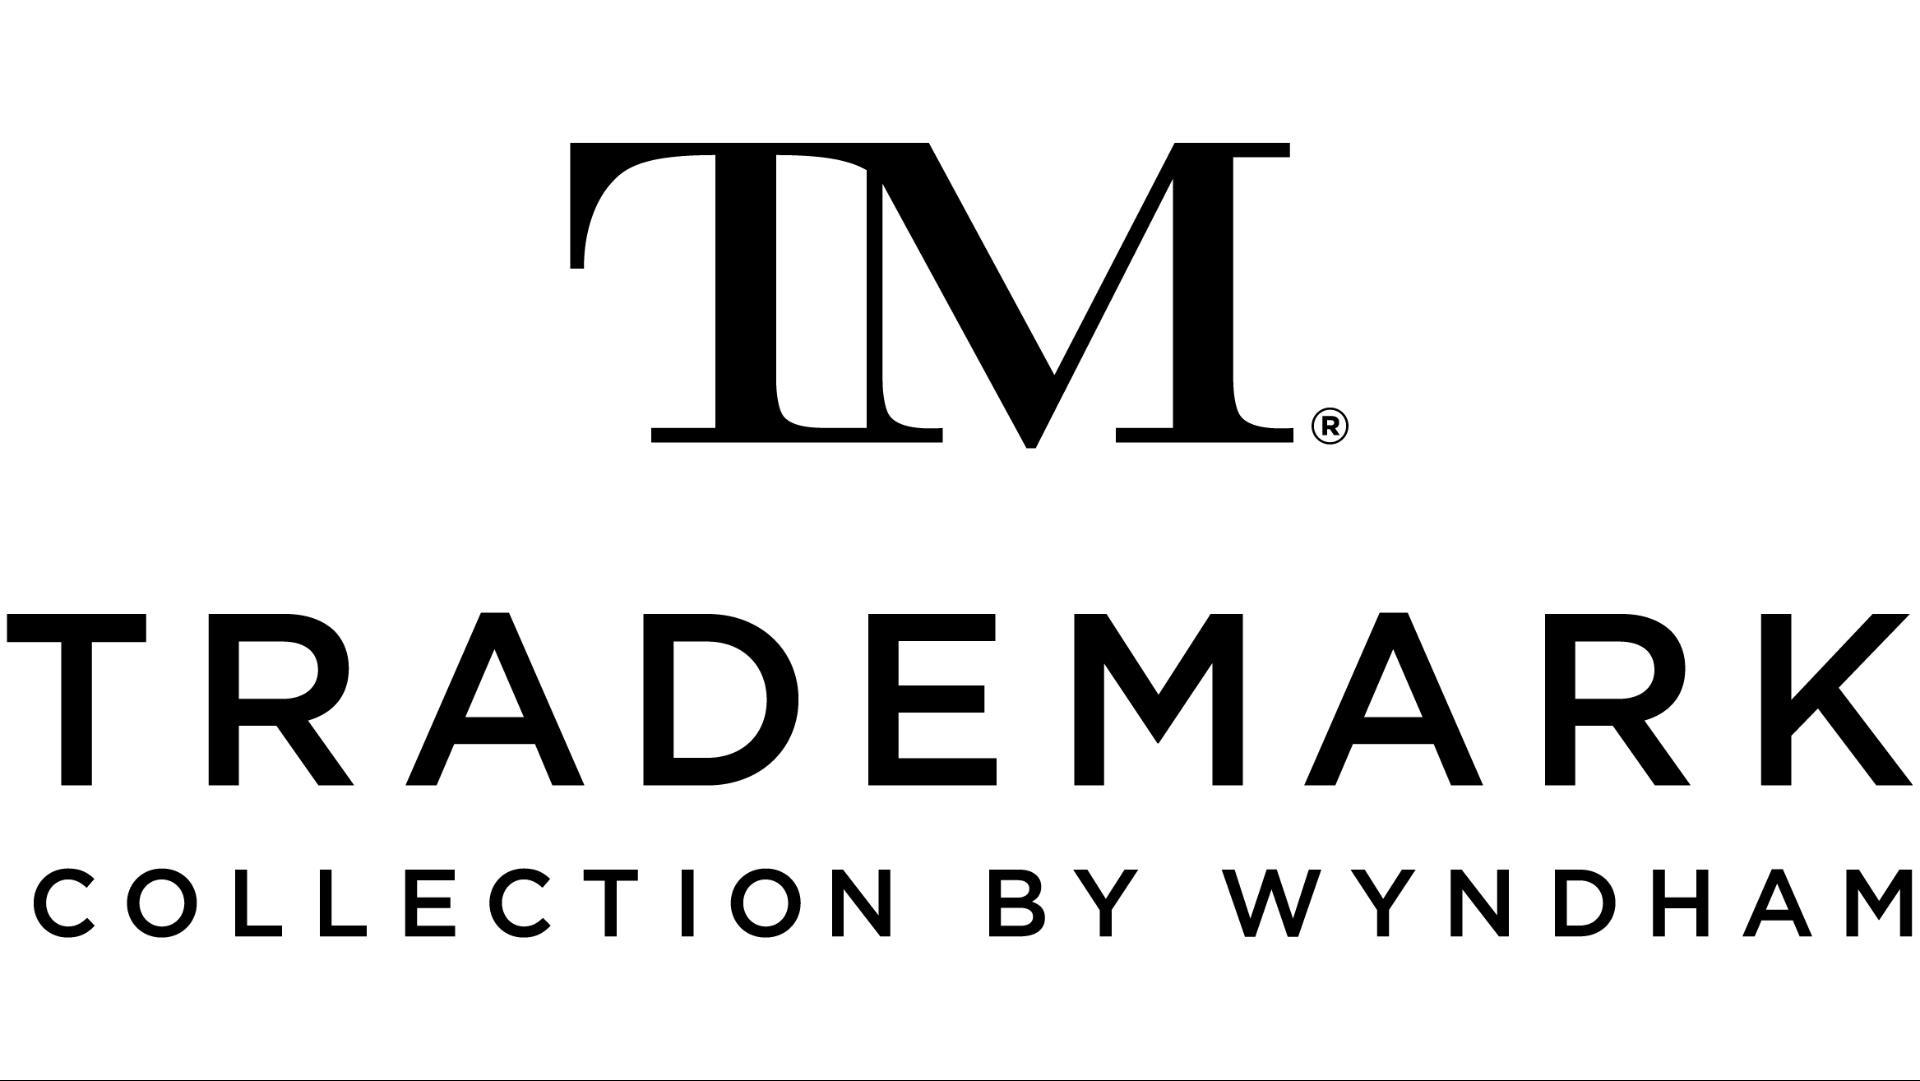 Los Cabos Golf Resort, Trademark Collection by Wyndham in Cabo San Lucas, MX